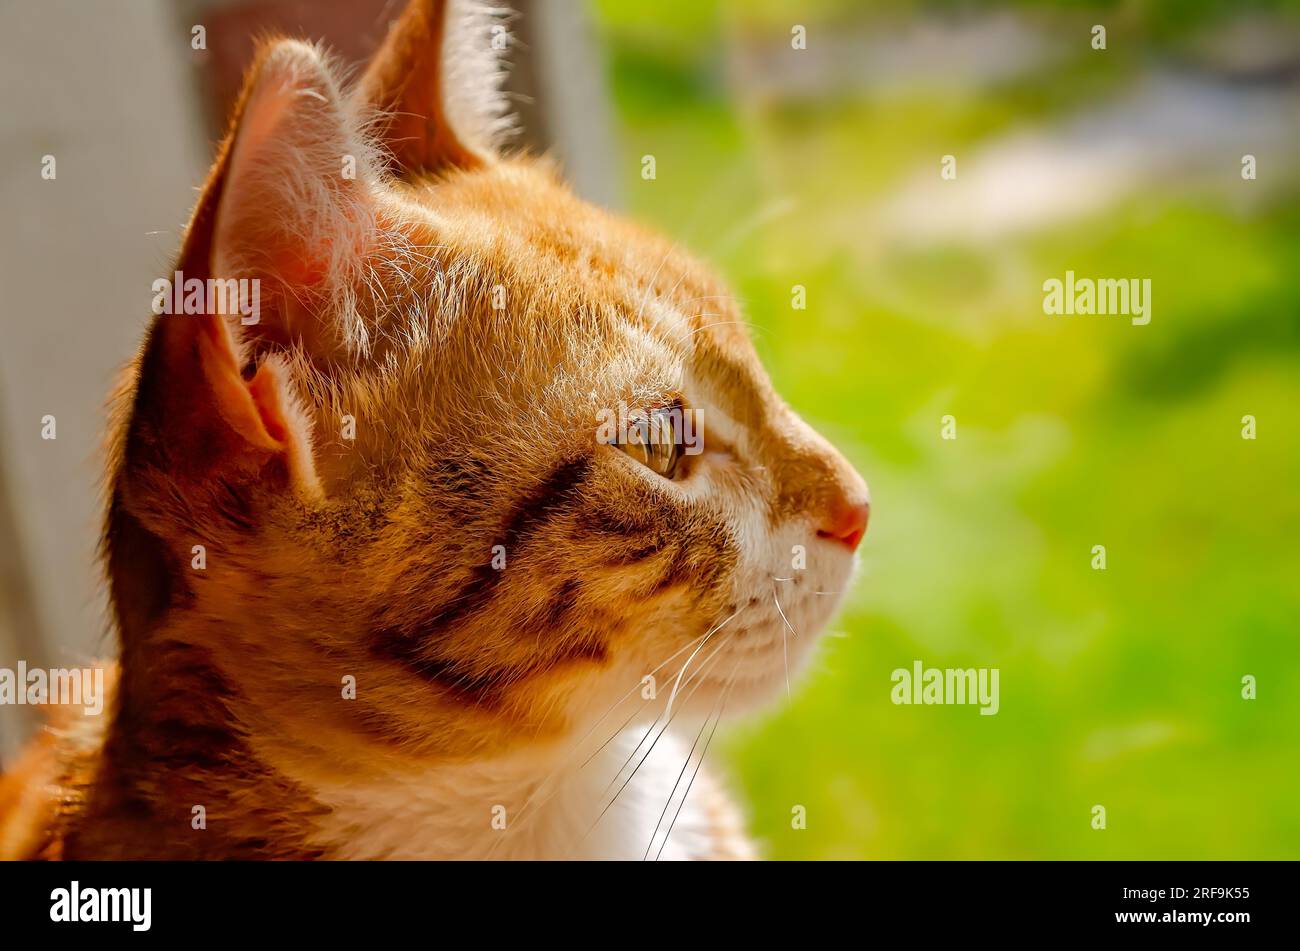 Wolfie, a 12-week-old orange and white kitten, looks out the window, July 2, 2023, in Coden, Alabama. Stock Photo